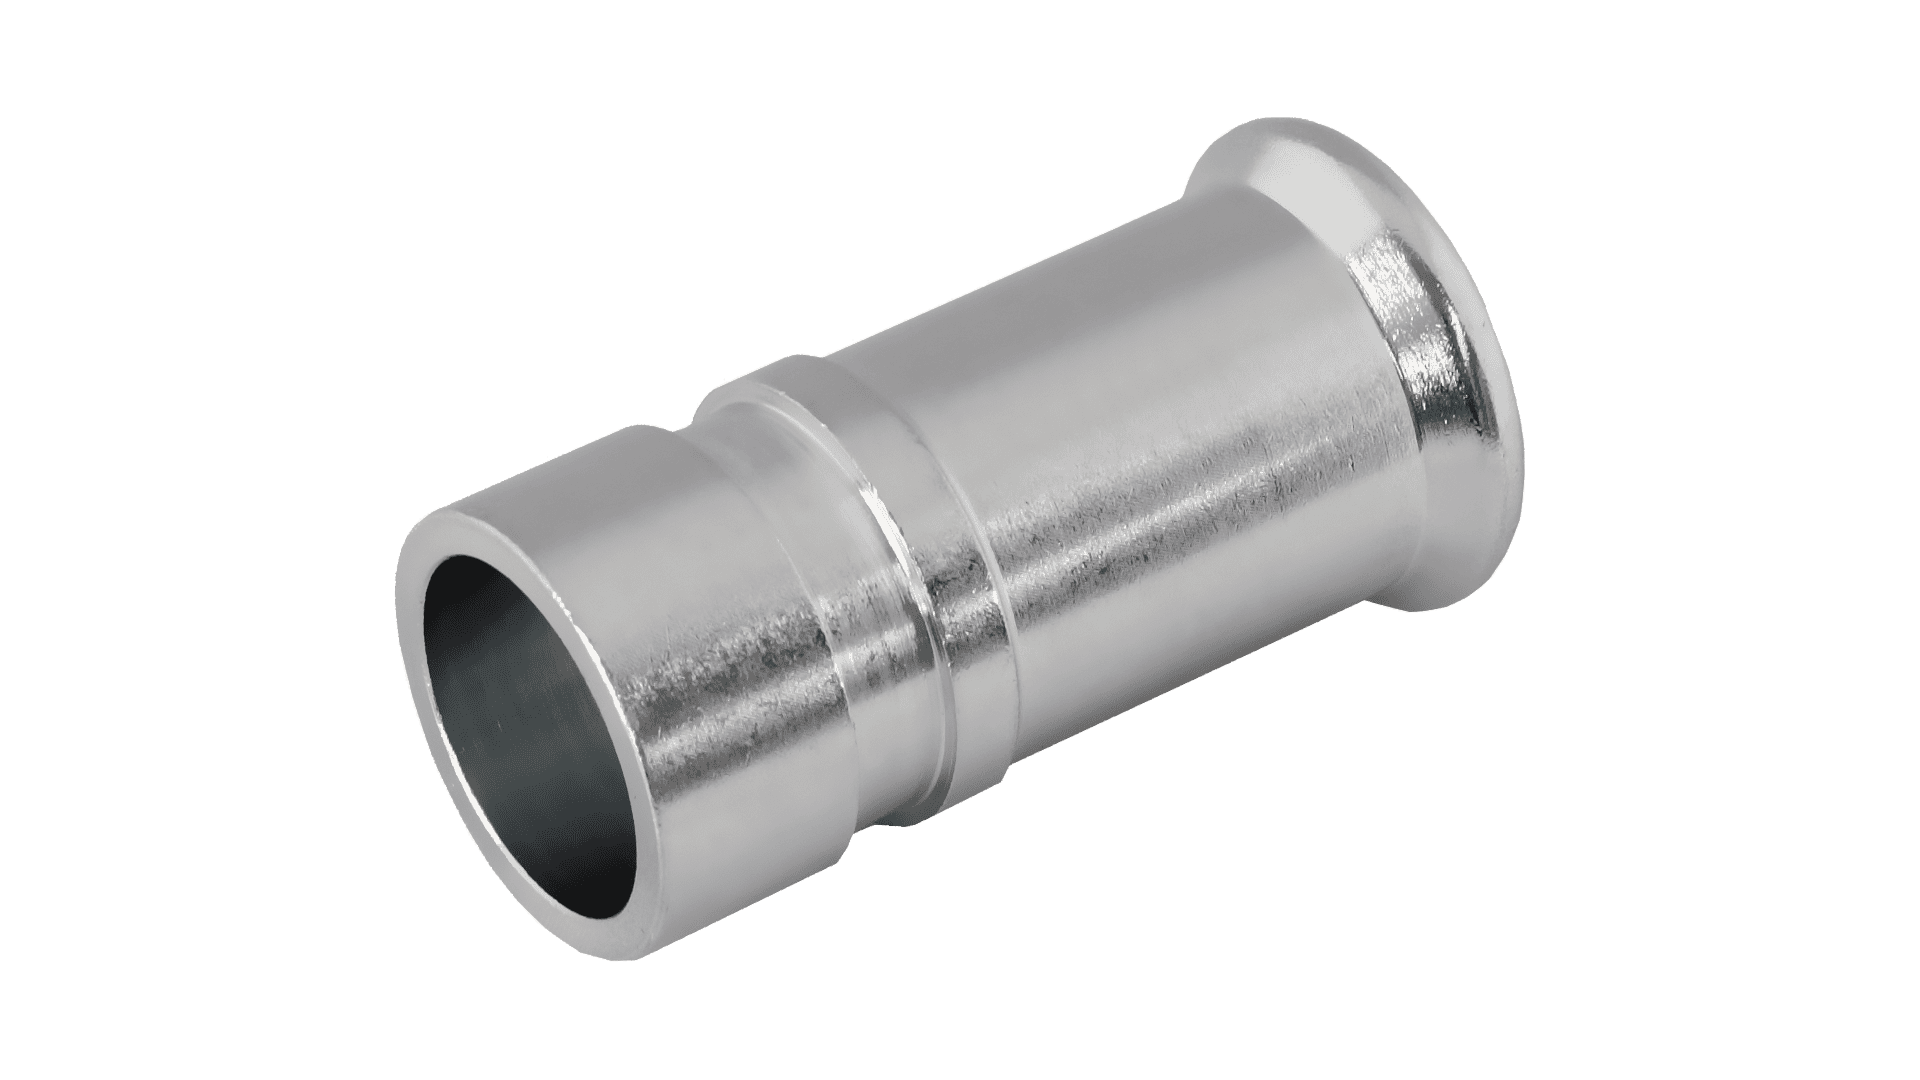 KAN-therm - Sprinkler Inox System - System compatibility with grooved steel systems due to bolted connection technology